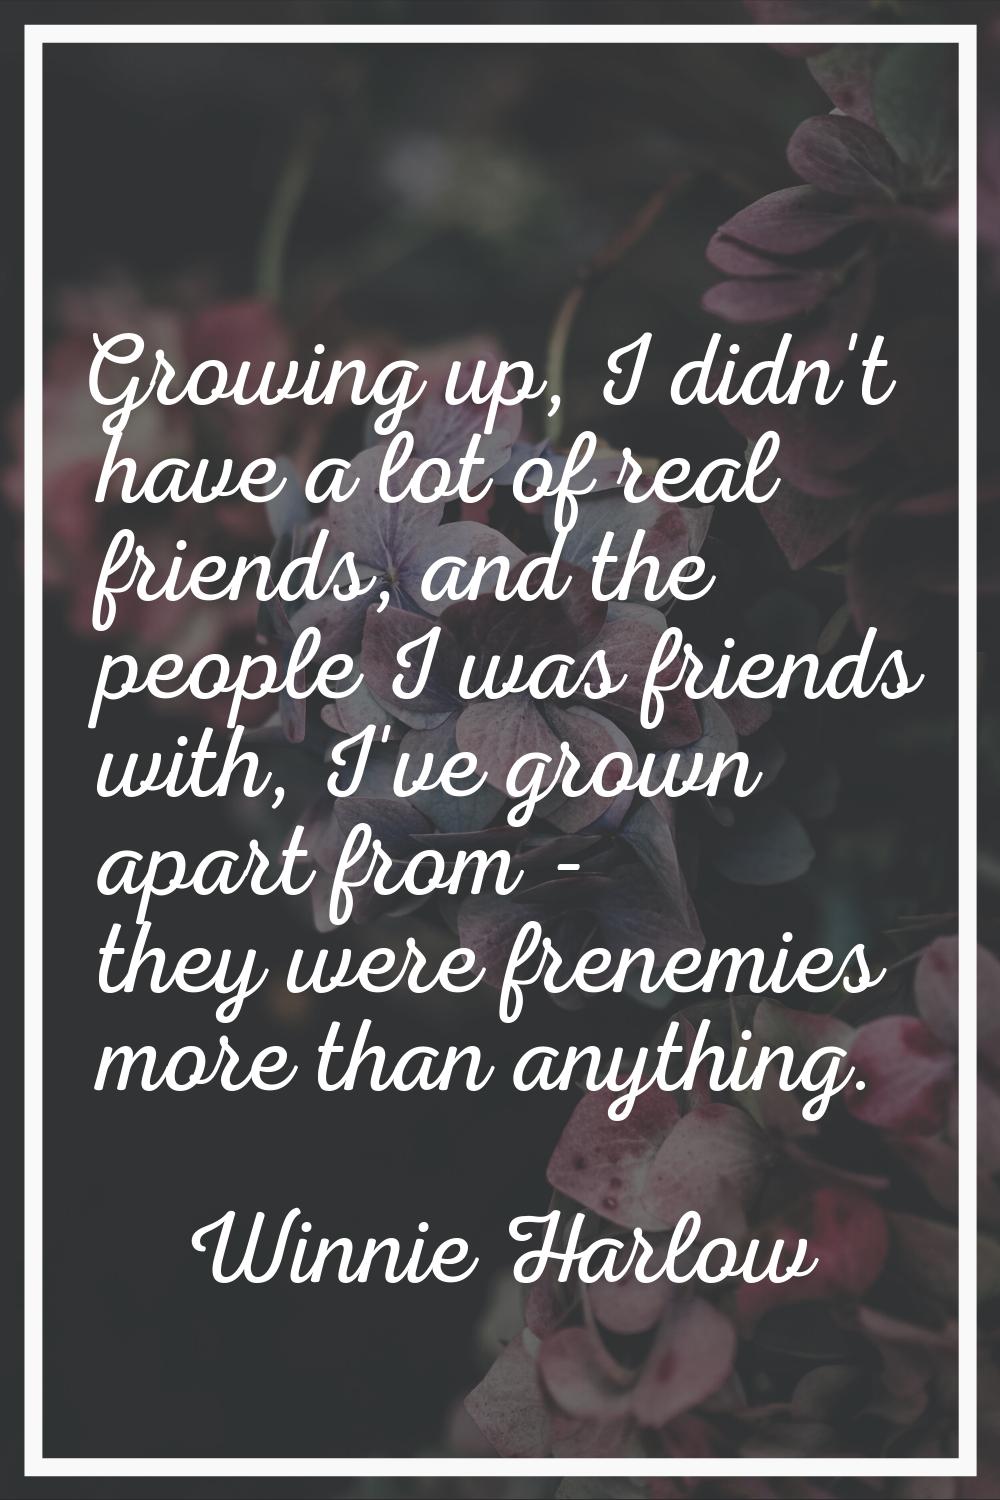 Growing up, I didn't have a lot of real friends, and the people I was friends with, I've grown apar